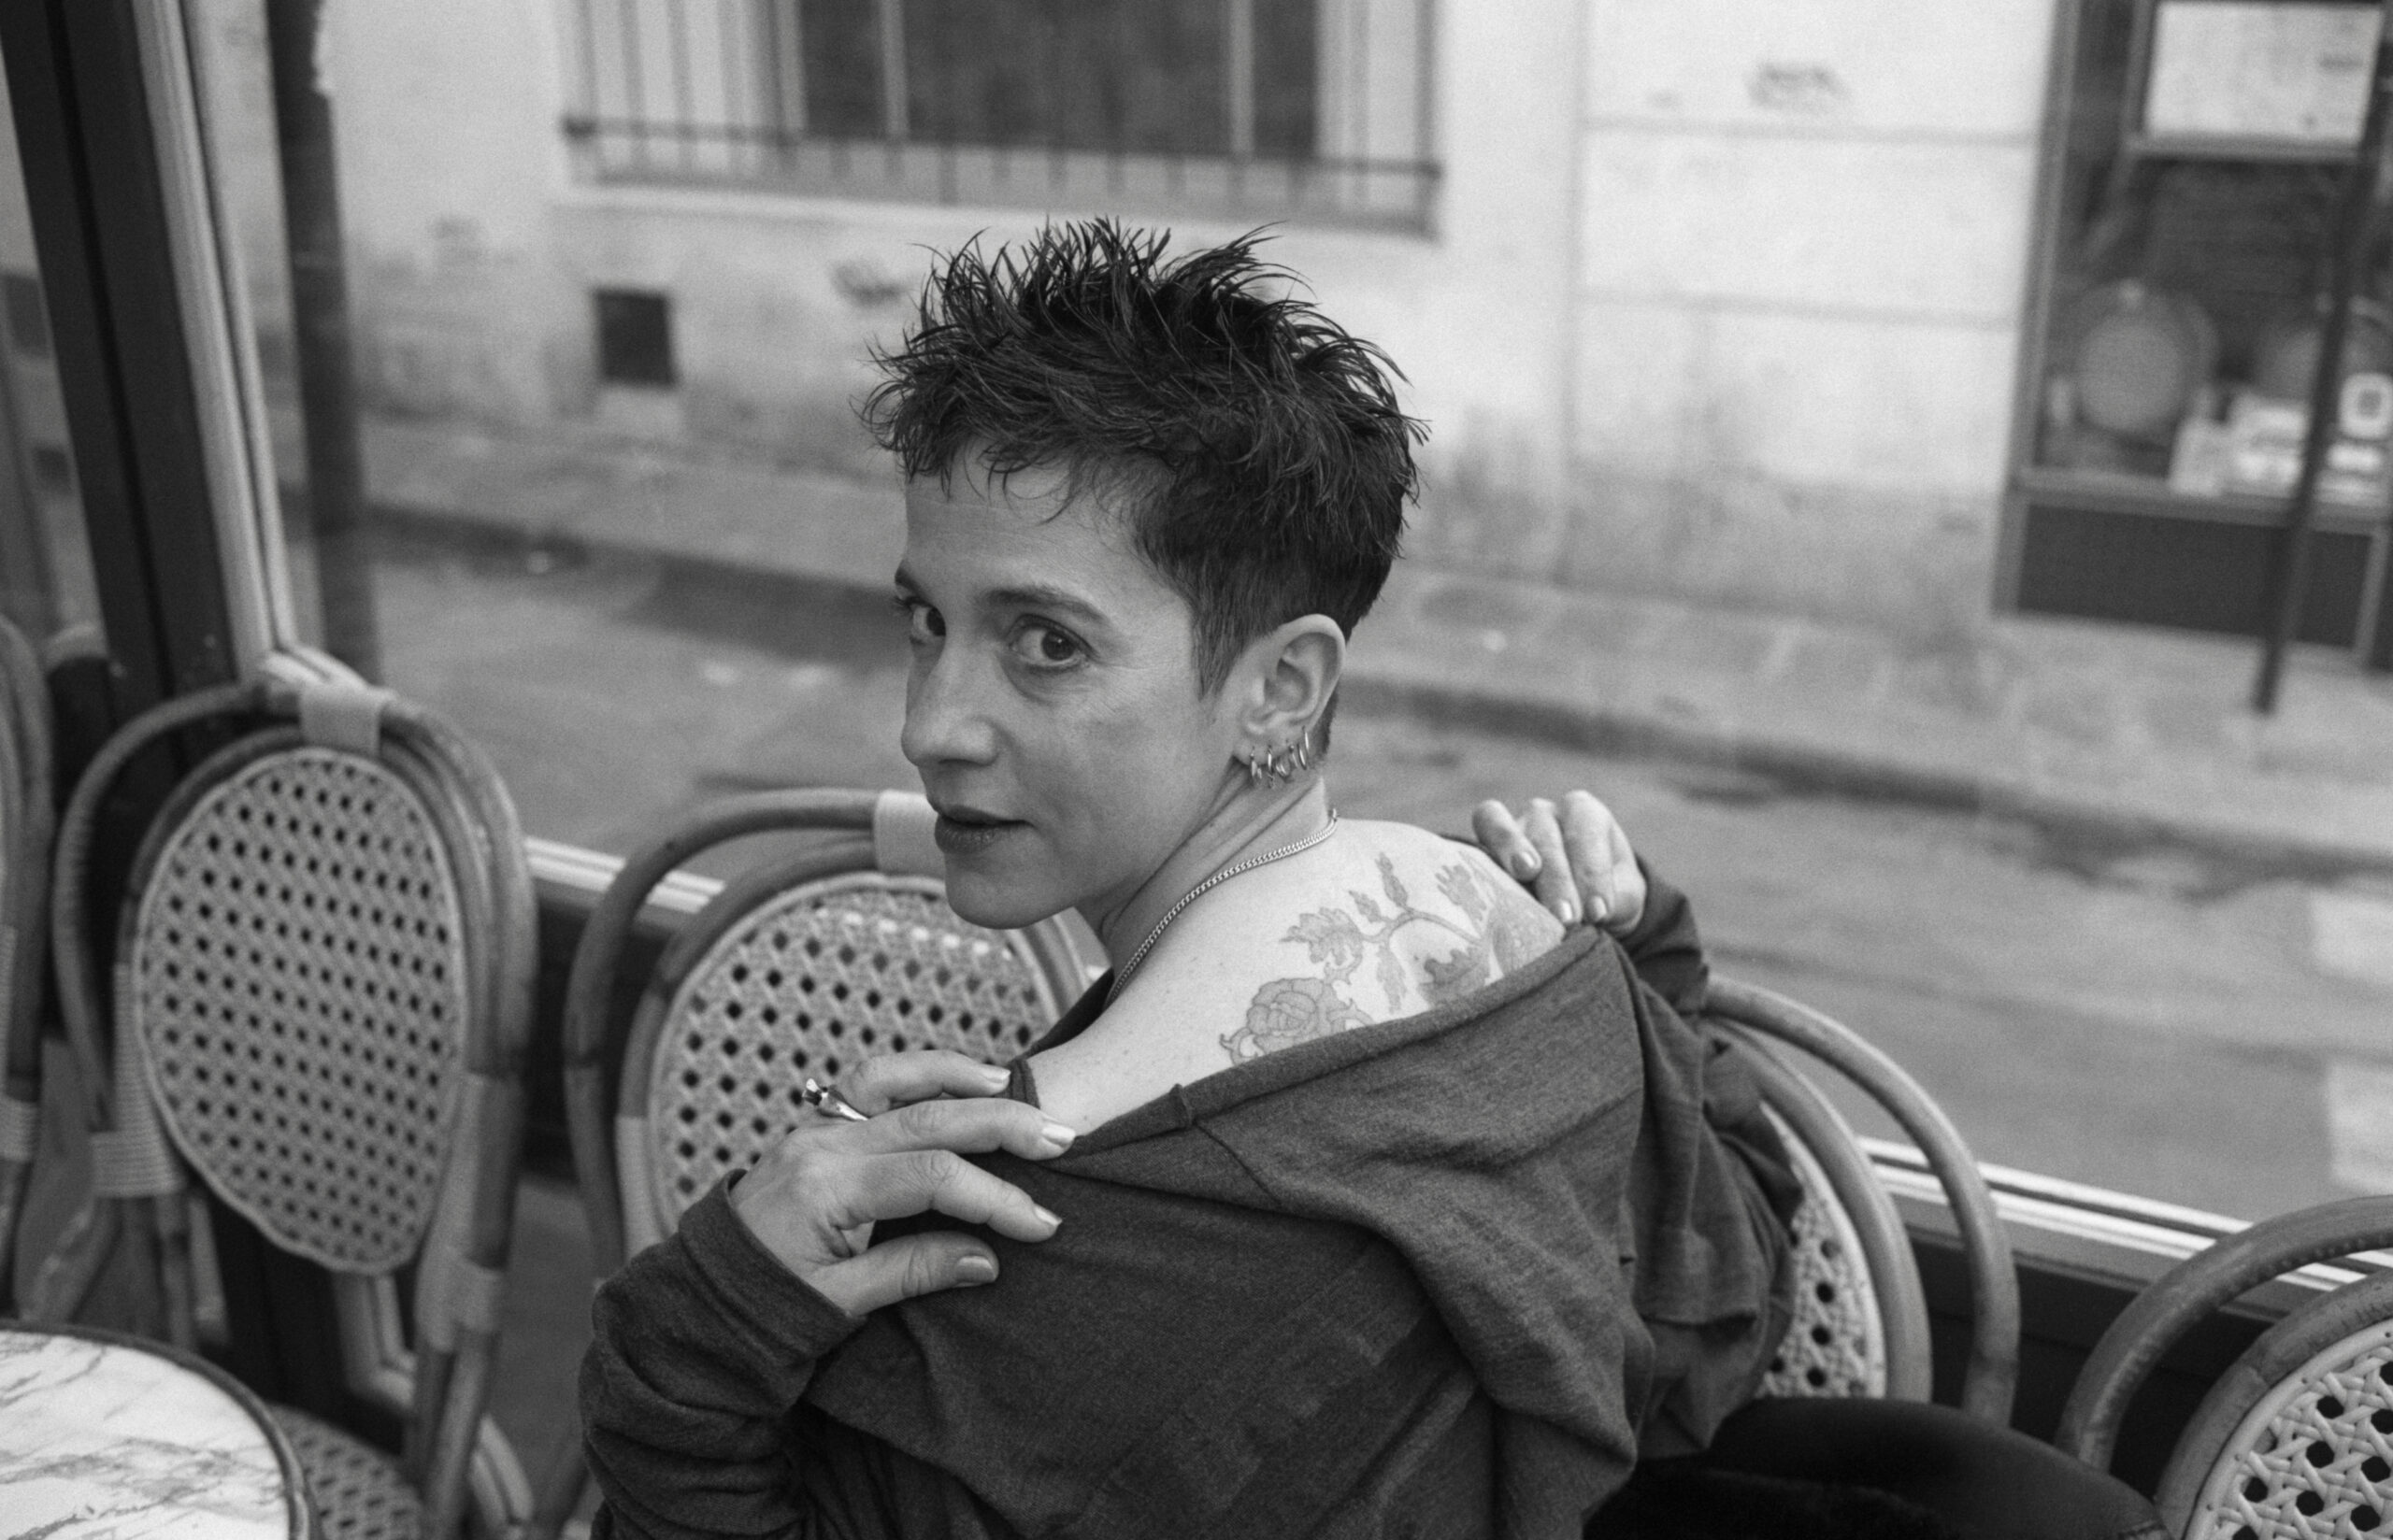 Kathy Acker Most Famous Author of Each Zodiac